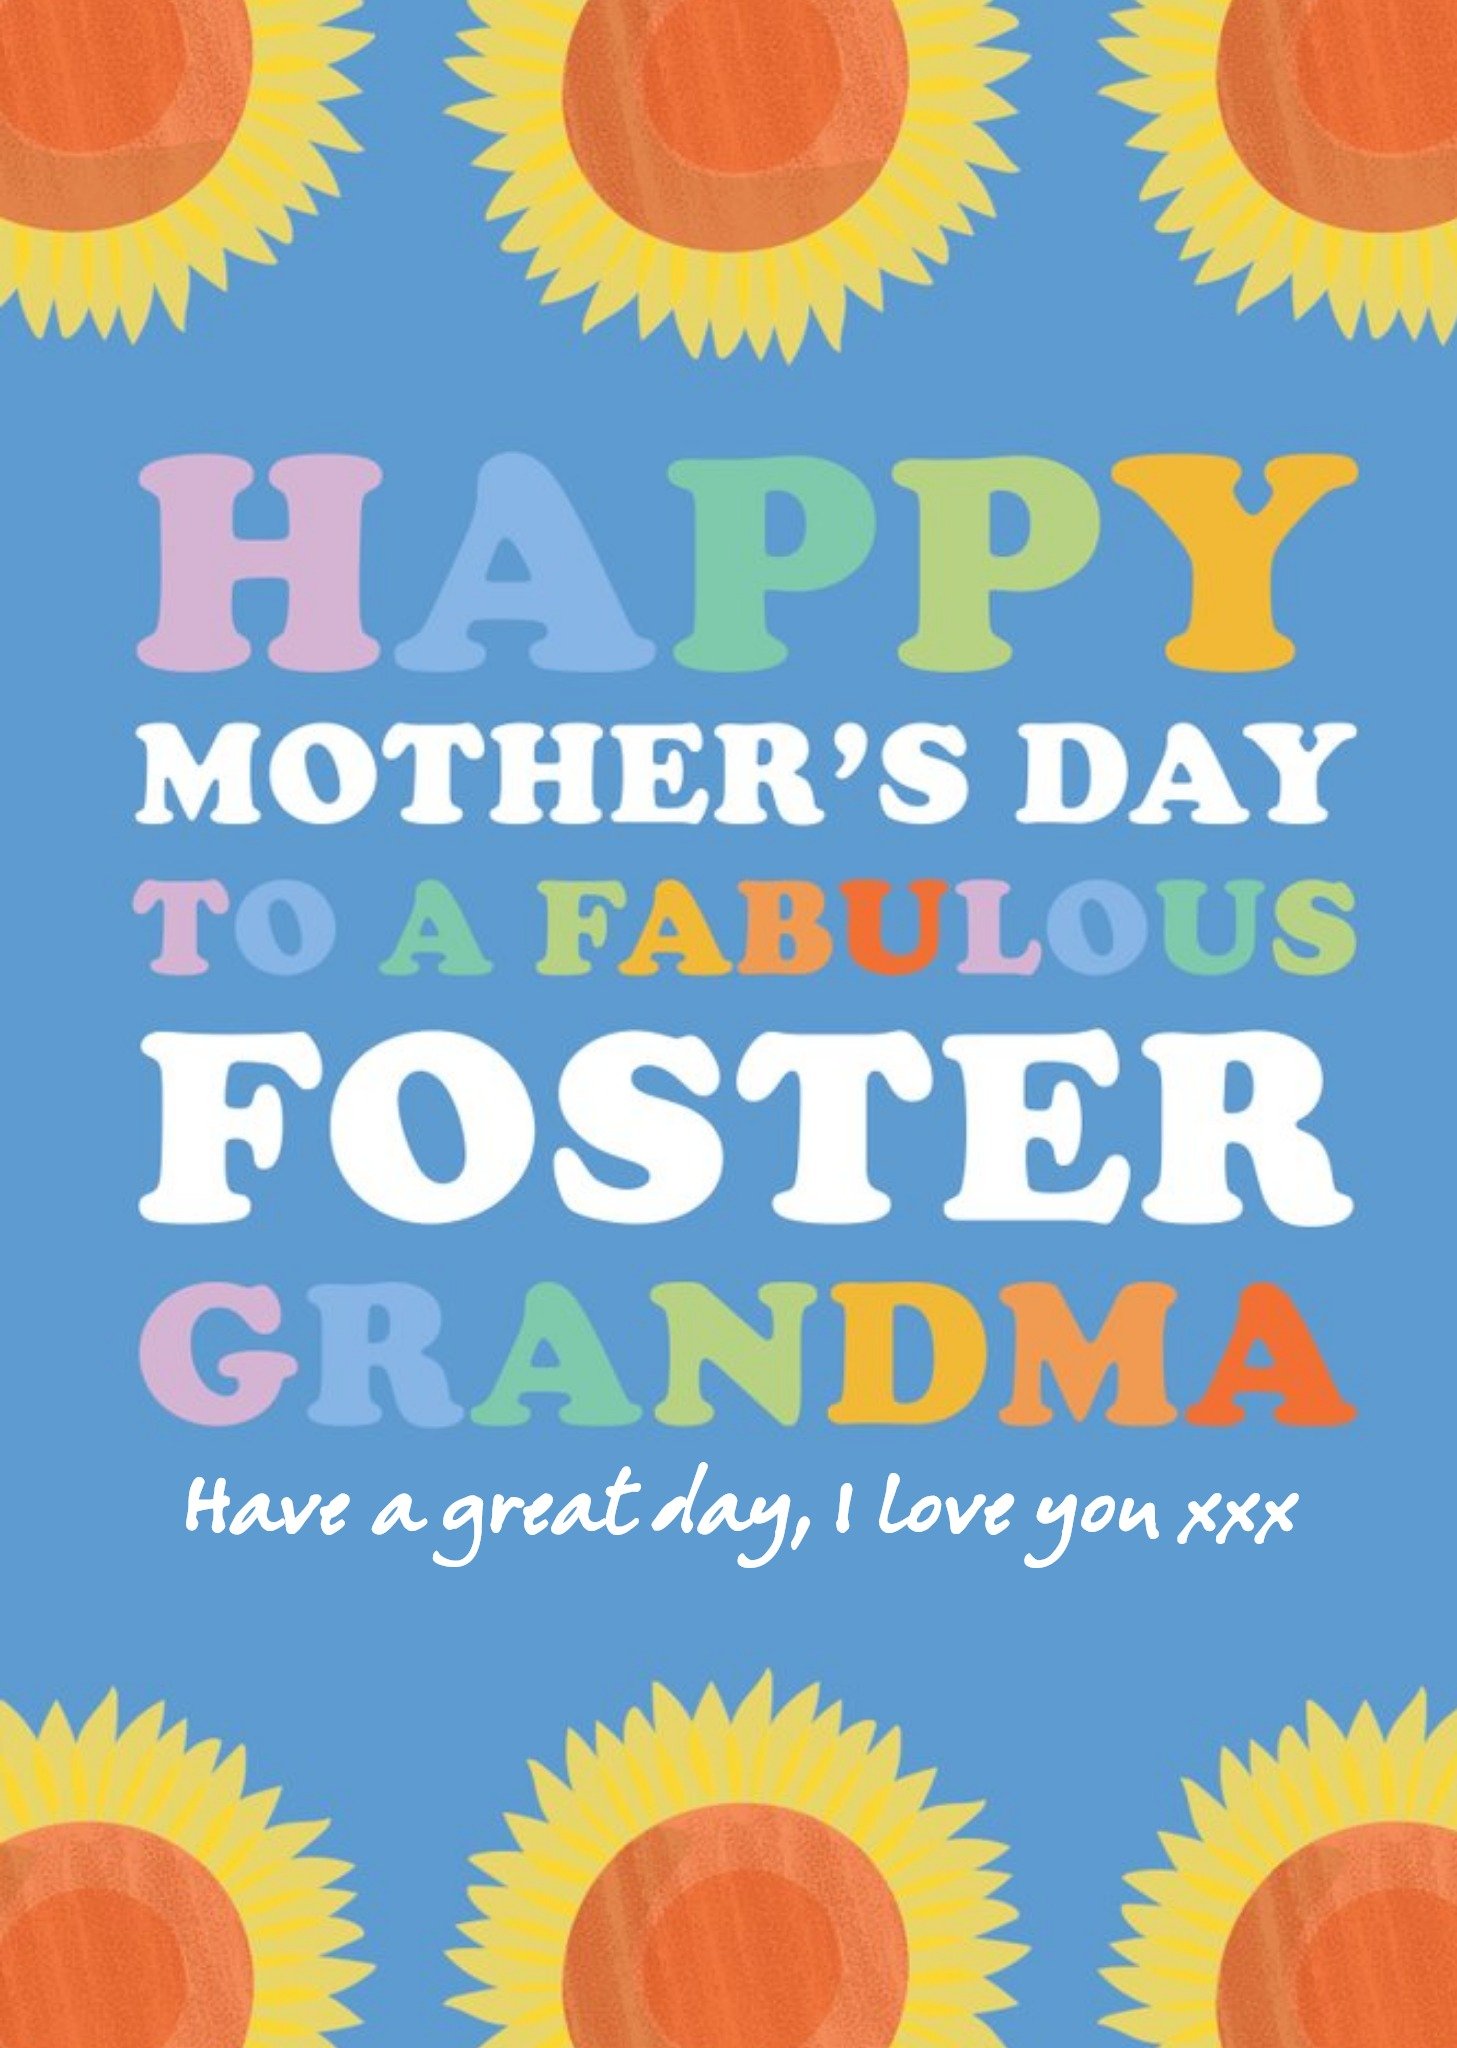 Moonpig To A Fabulous Foster Grandmother Mother's Day Card Ecard